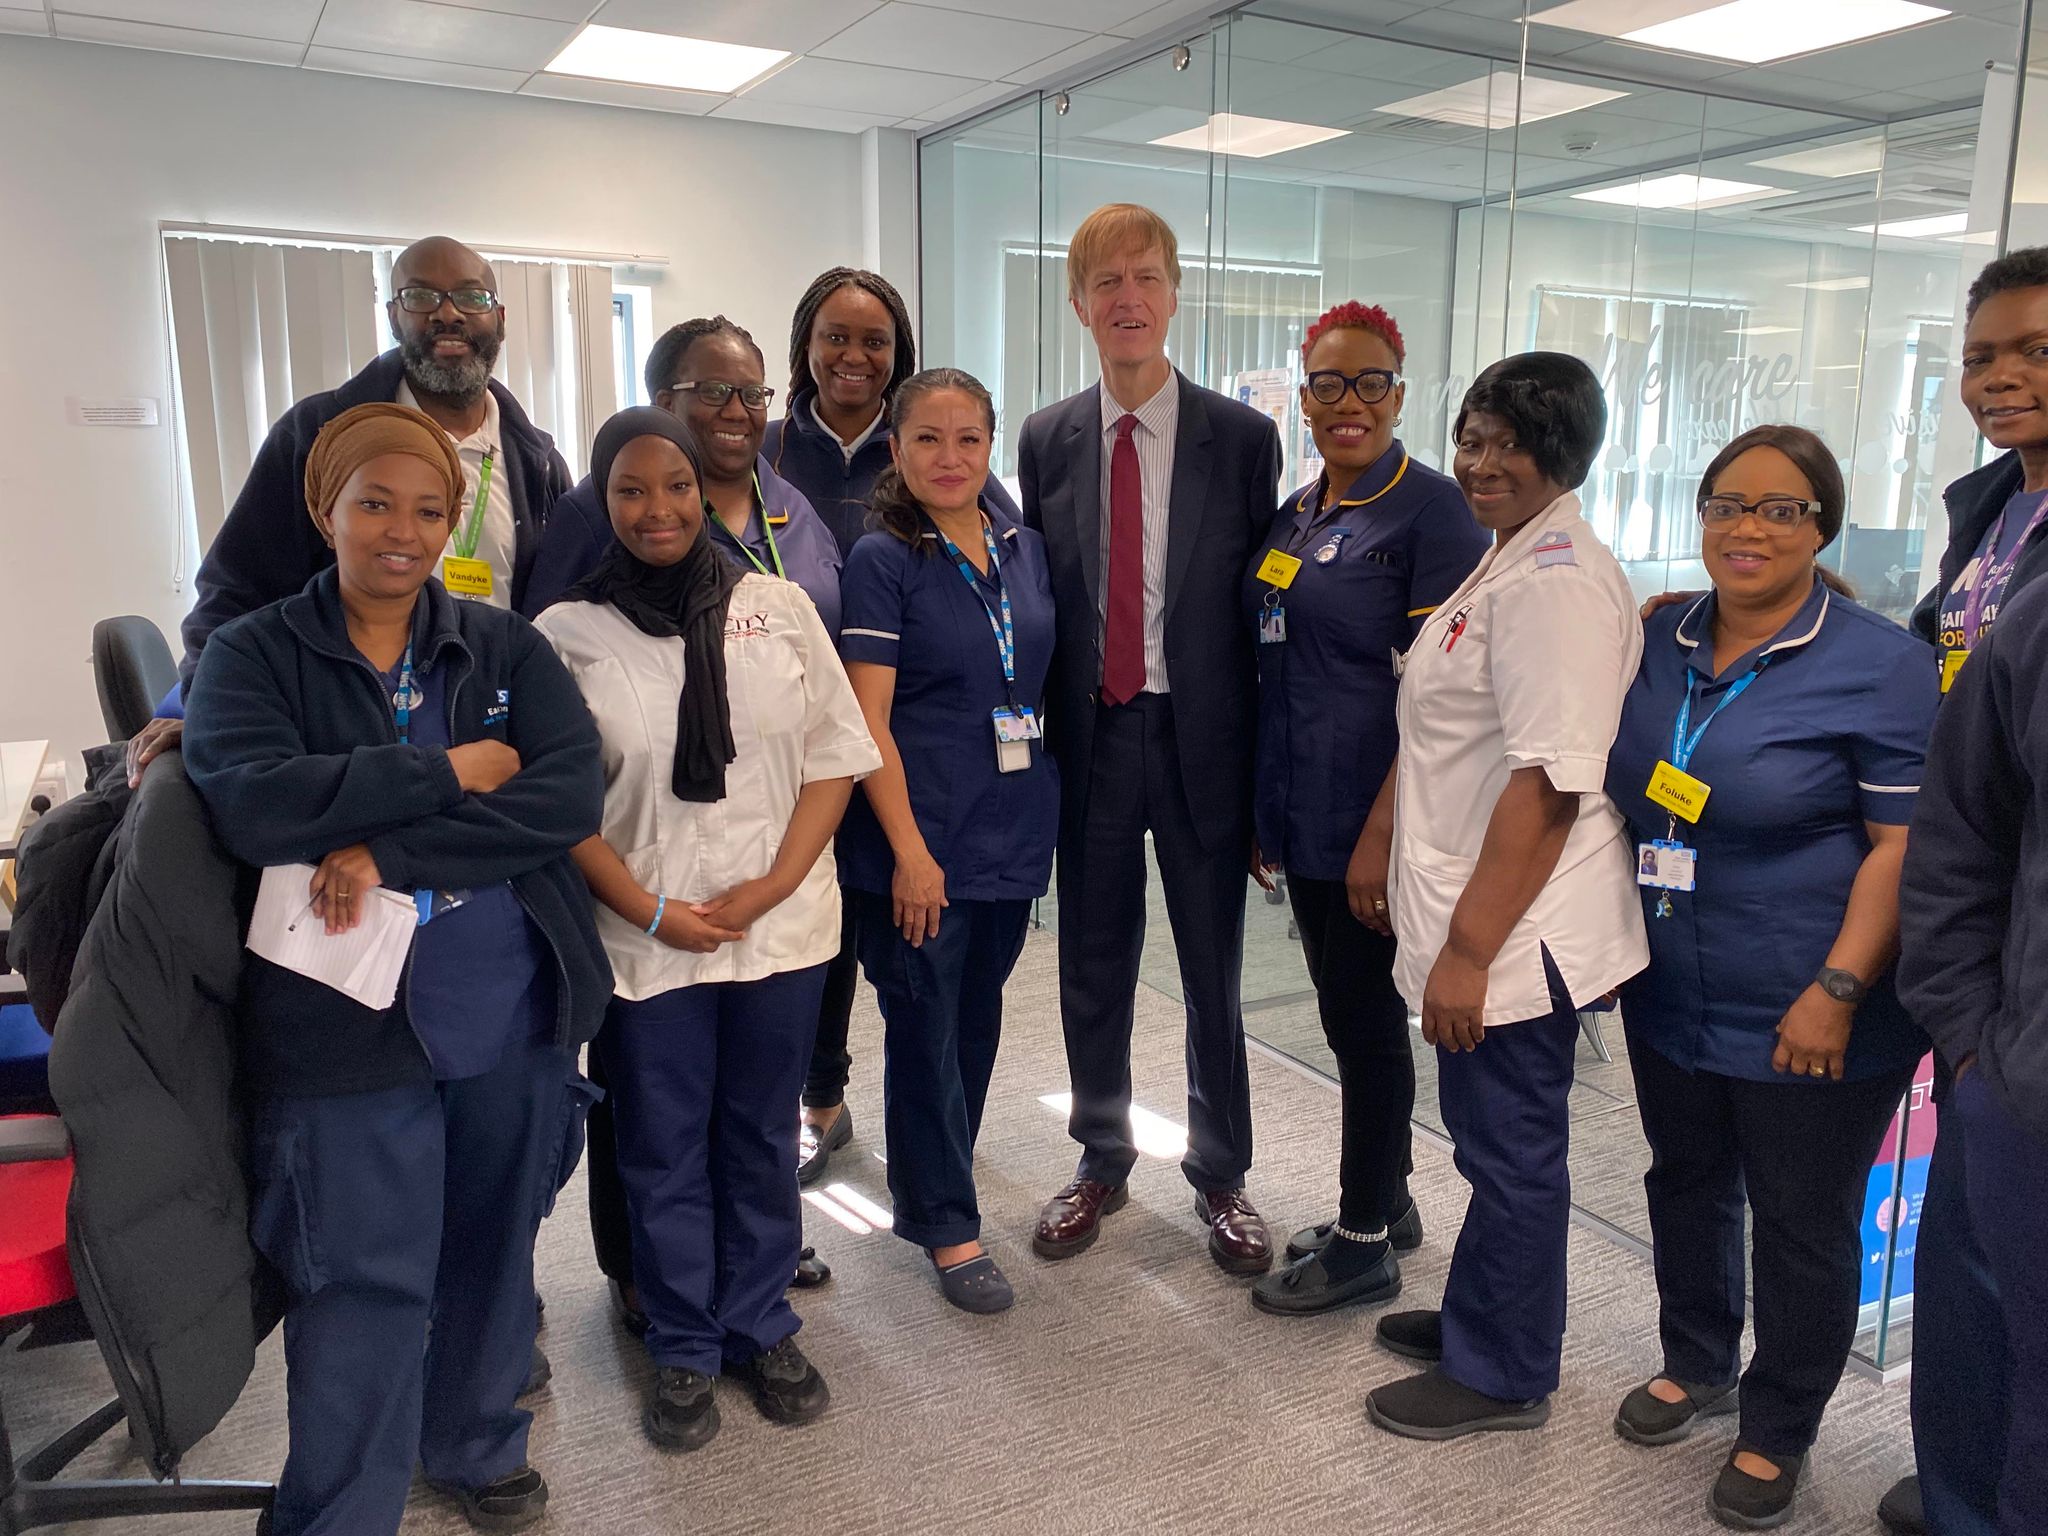 Sir Stephen Timms MP standing next to staff from the Urgent Care Response (UCR) team.